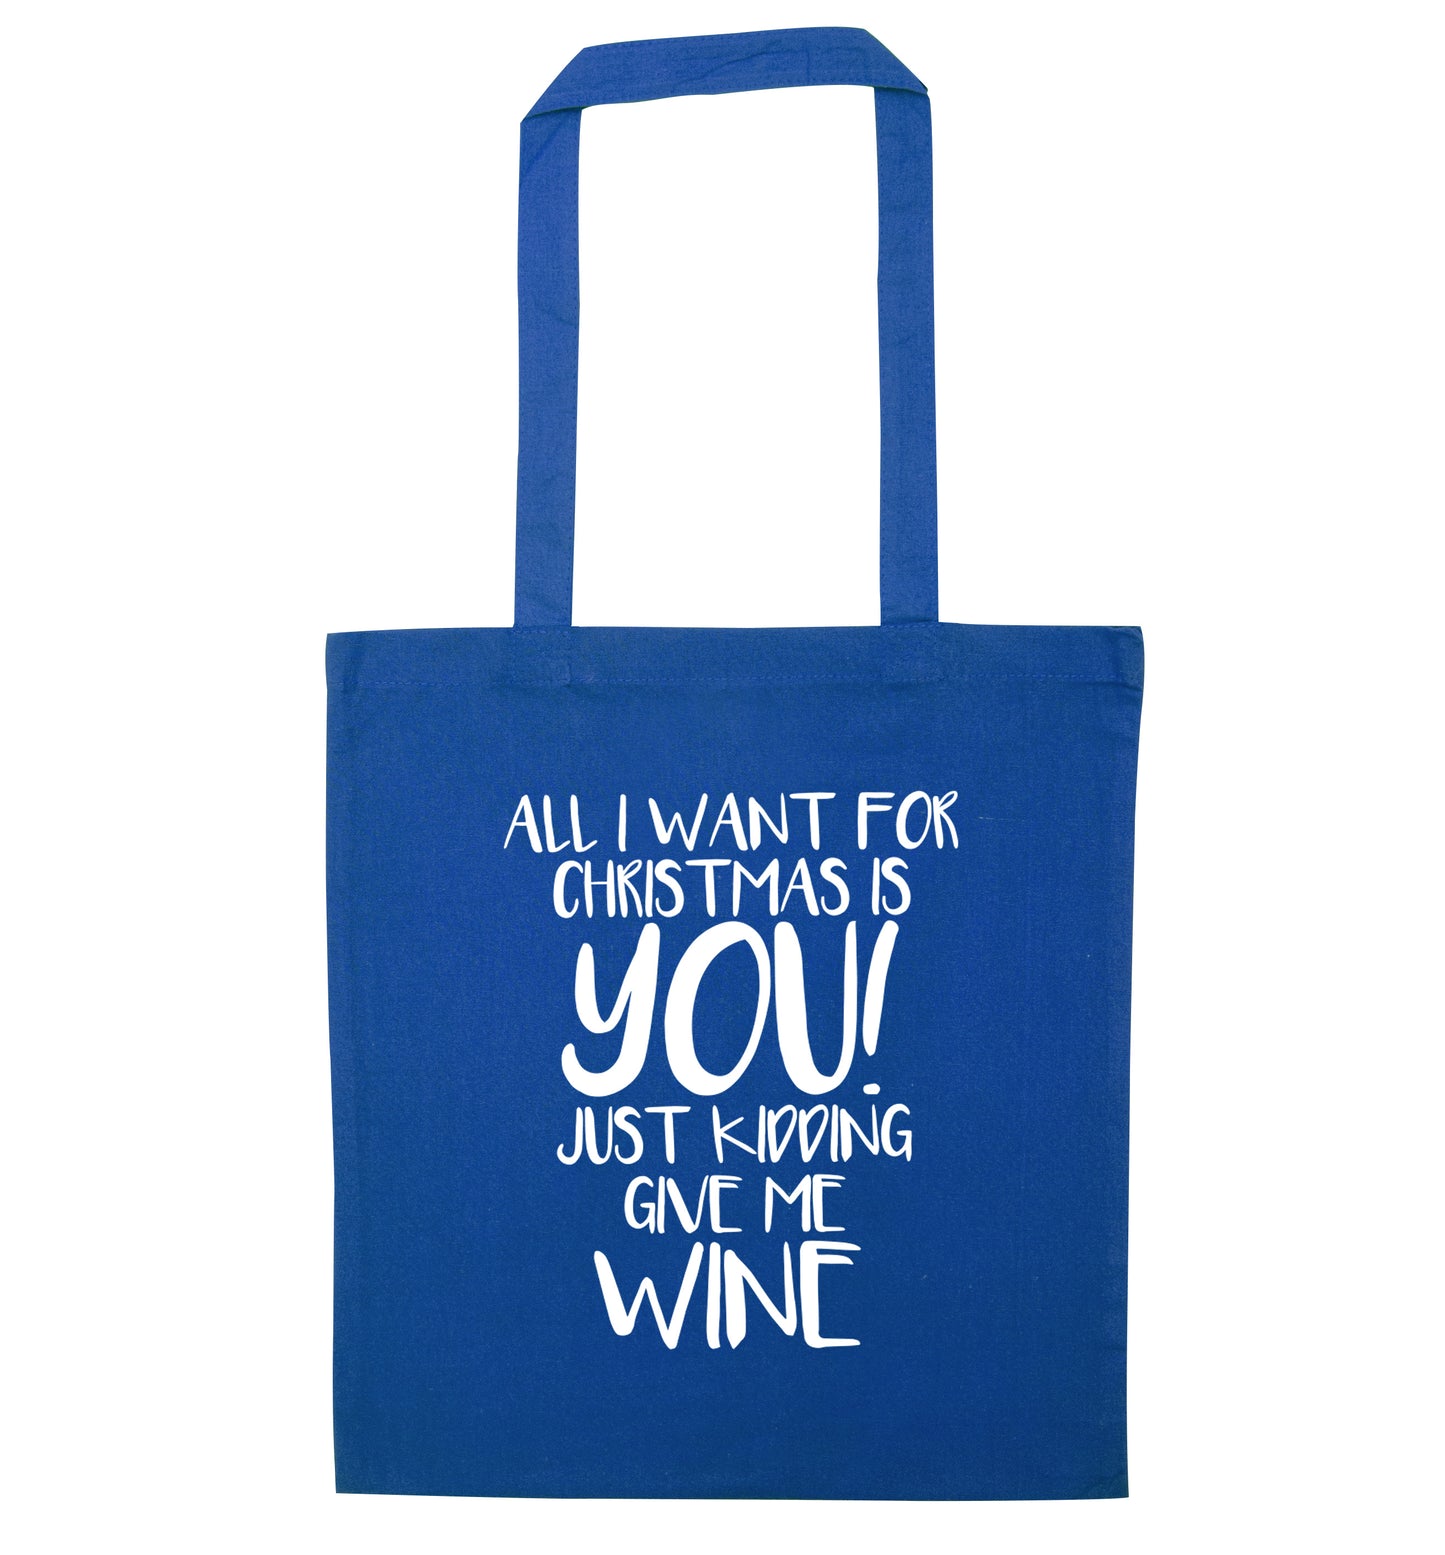 All I want for christmas is you just kidding give me the wine blue tote bag